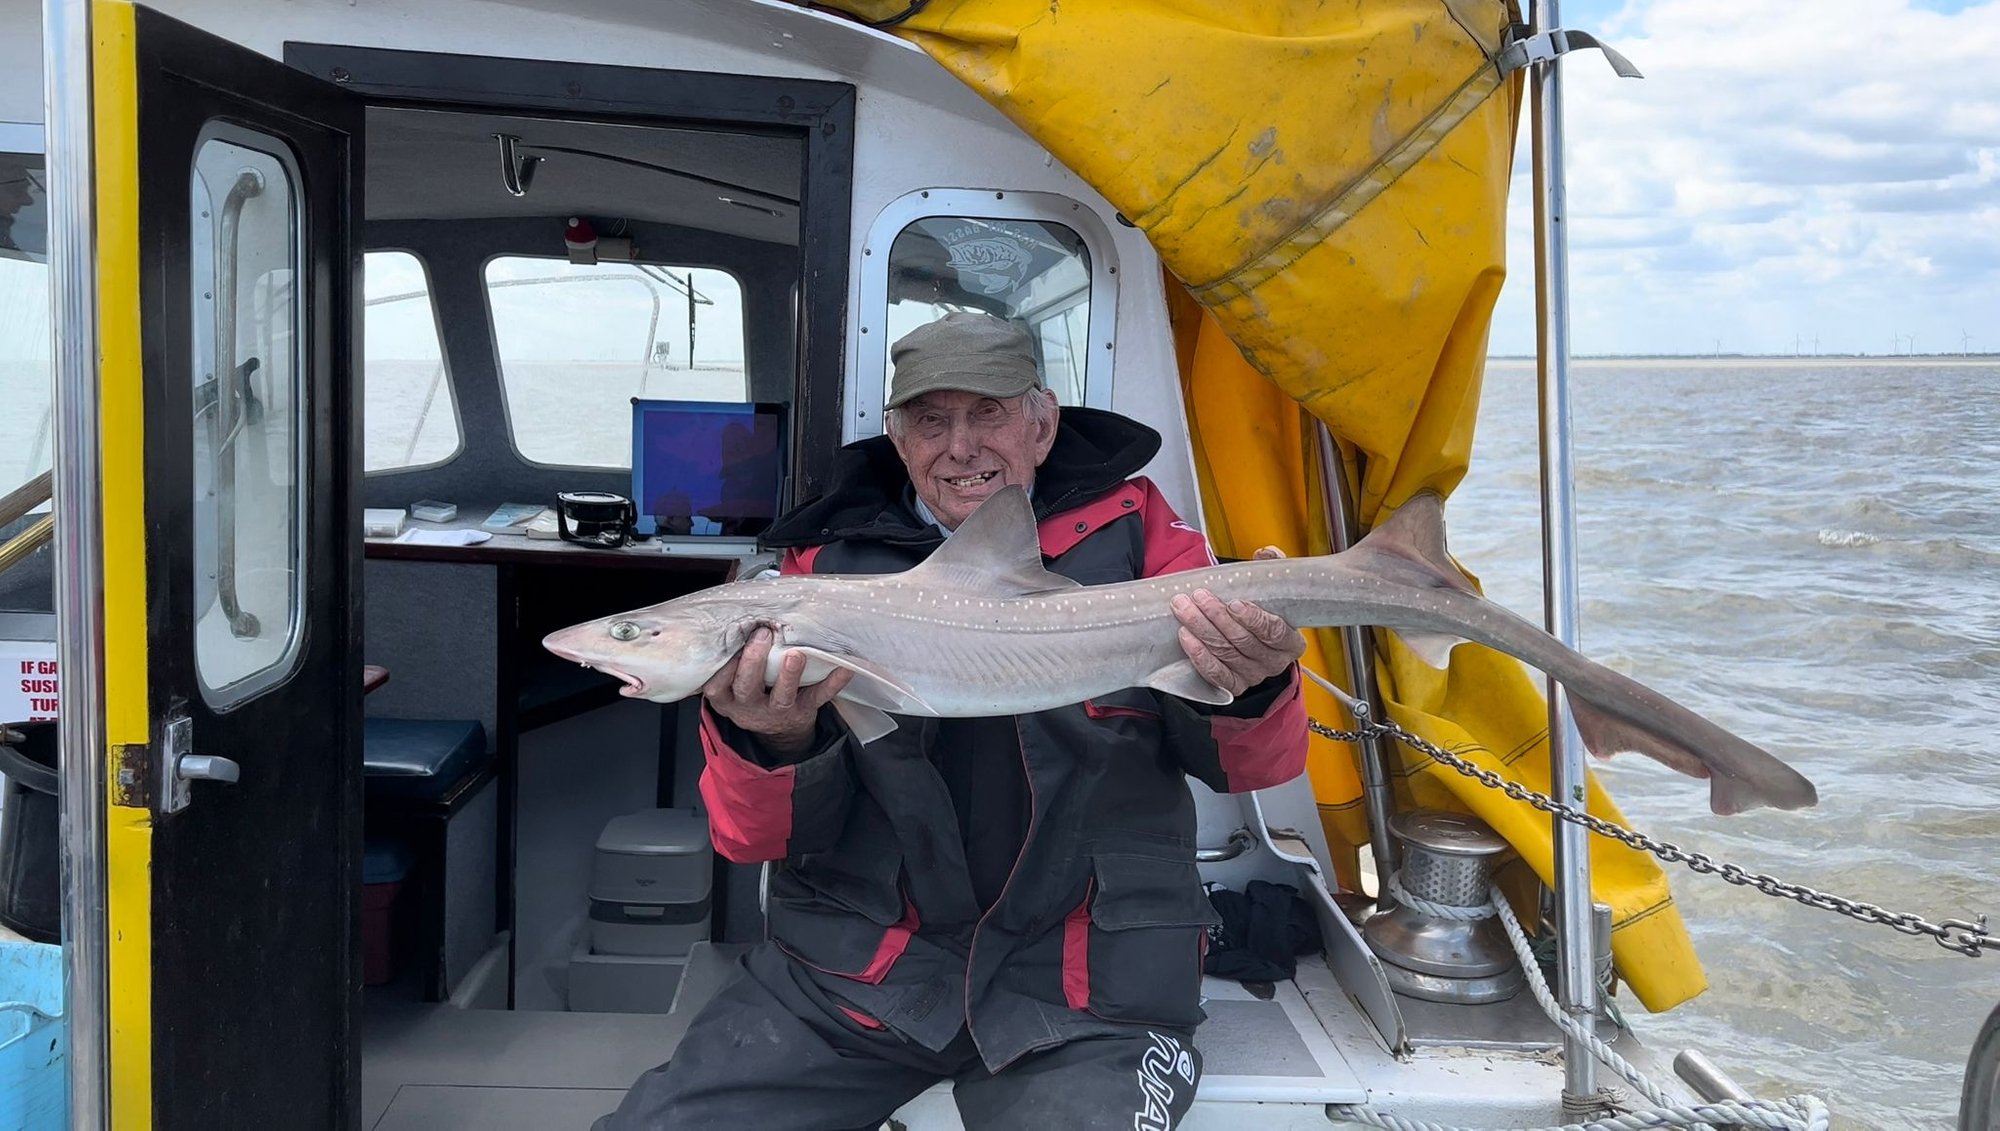 John with his 12 lb smoothhound